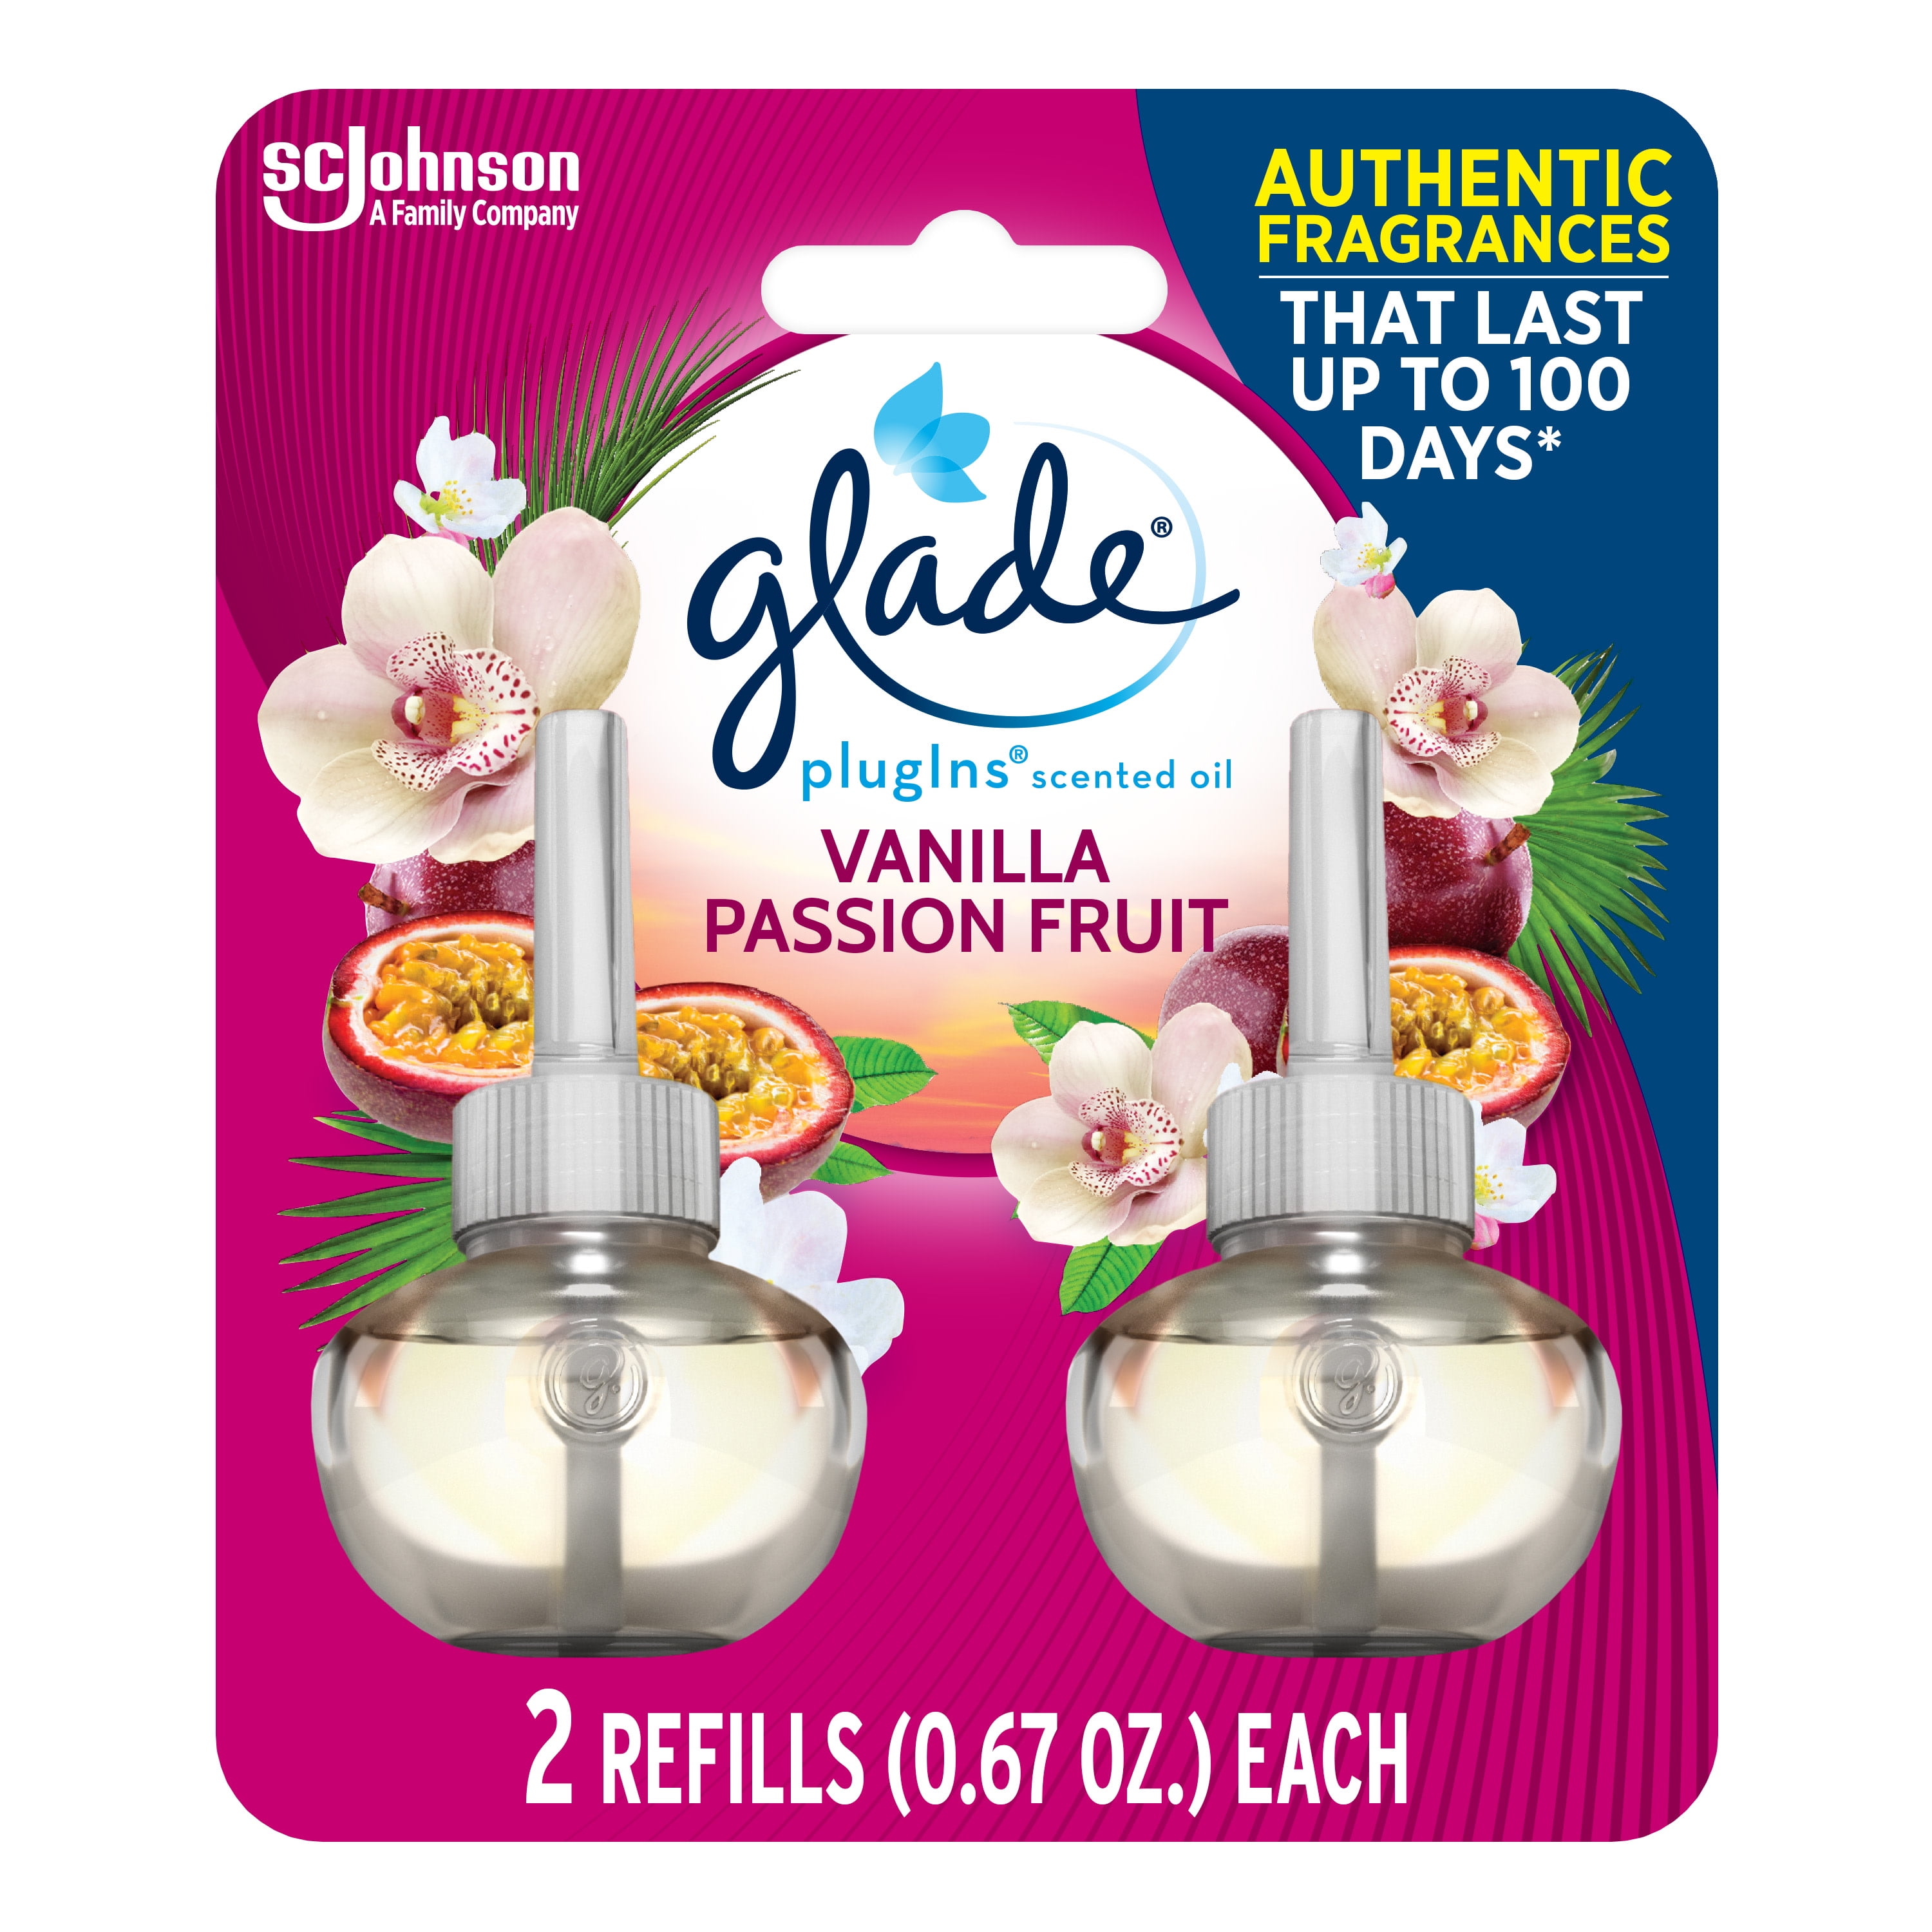 Glade PlugIns Refill 2 CT, Vanilla Passion Fruit, 1.34 FL. OZ. Total, Scented Oil Air Freshener Infused with Essential Oils